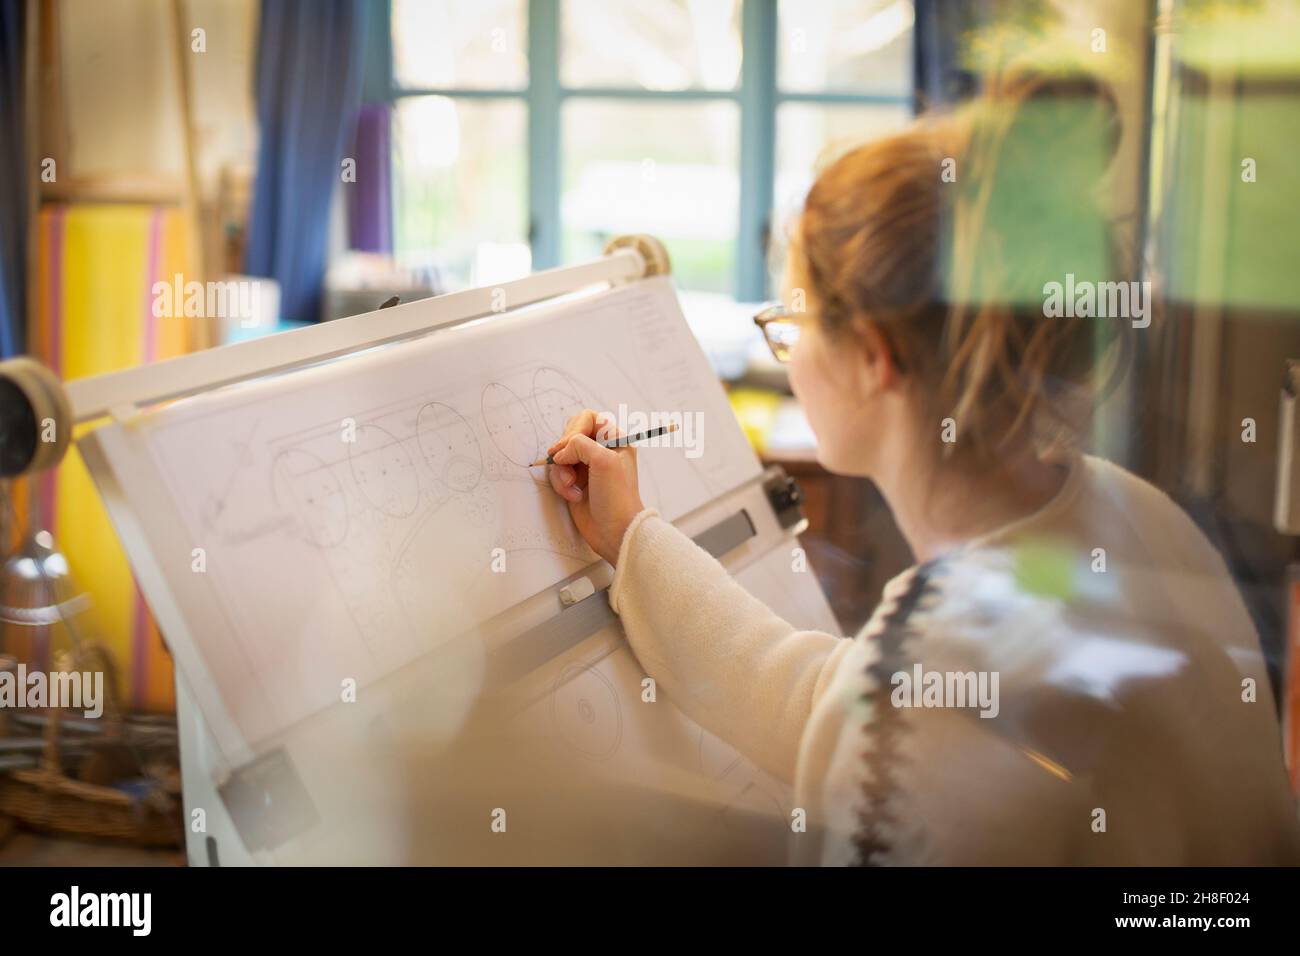 Female architect drafting blueprints in home office Stock Photo